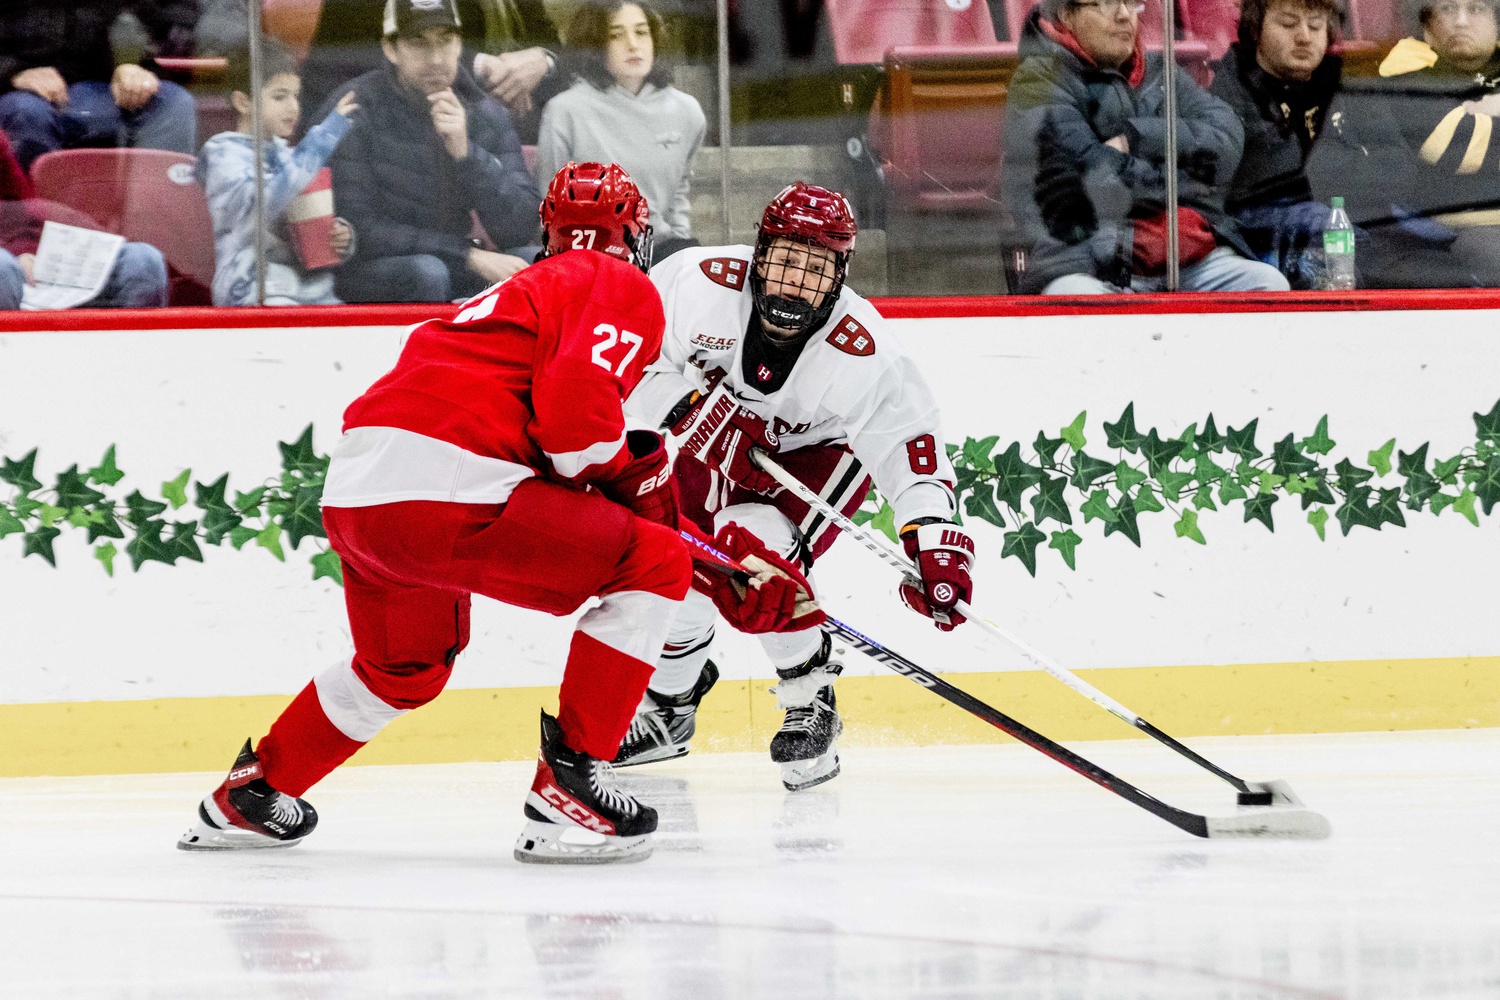 Then-sophomore forward Alex Gaffney skates up the ice against Cornell on January 28, 2023.